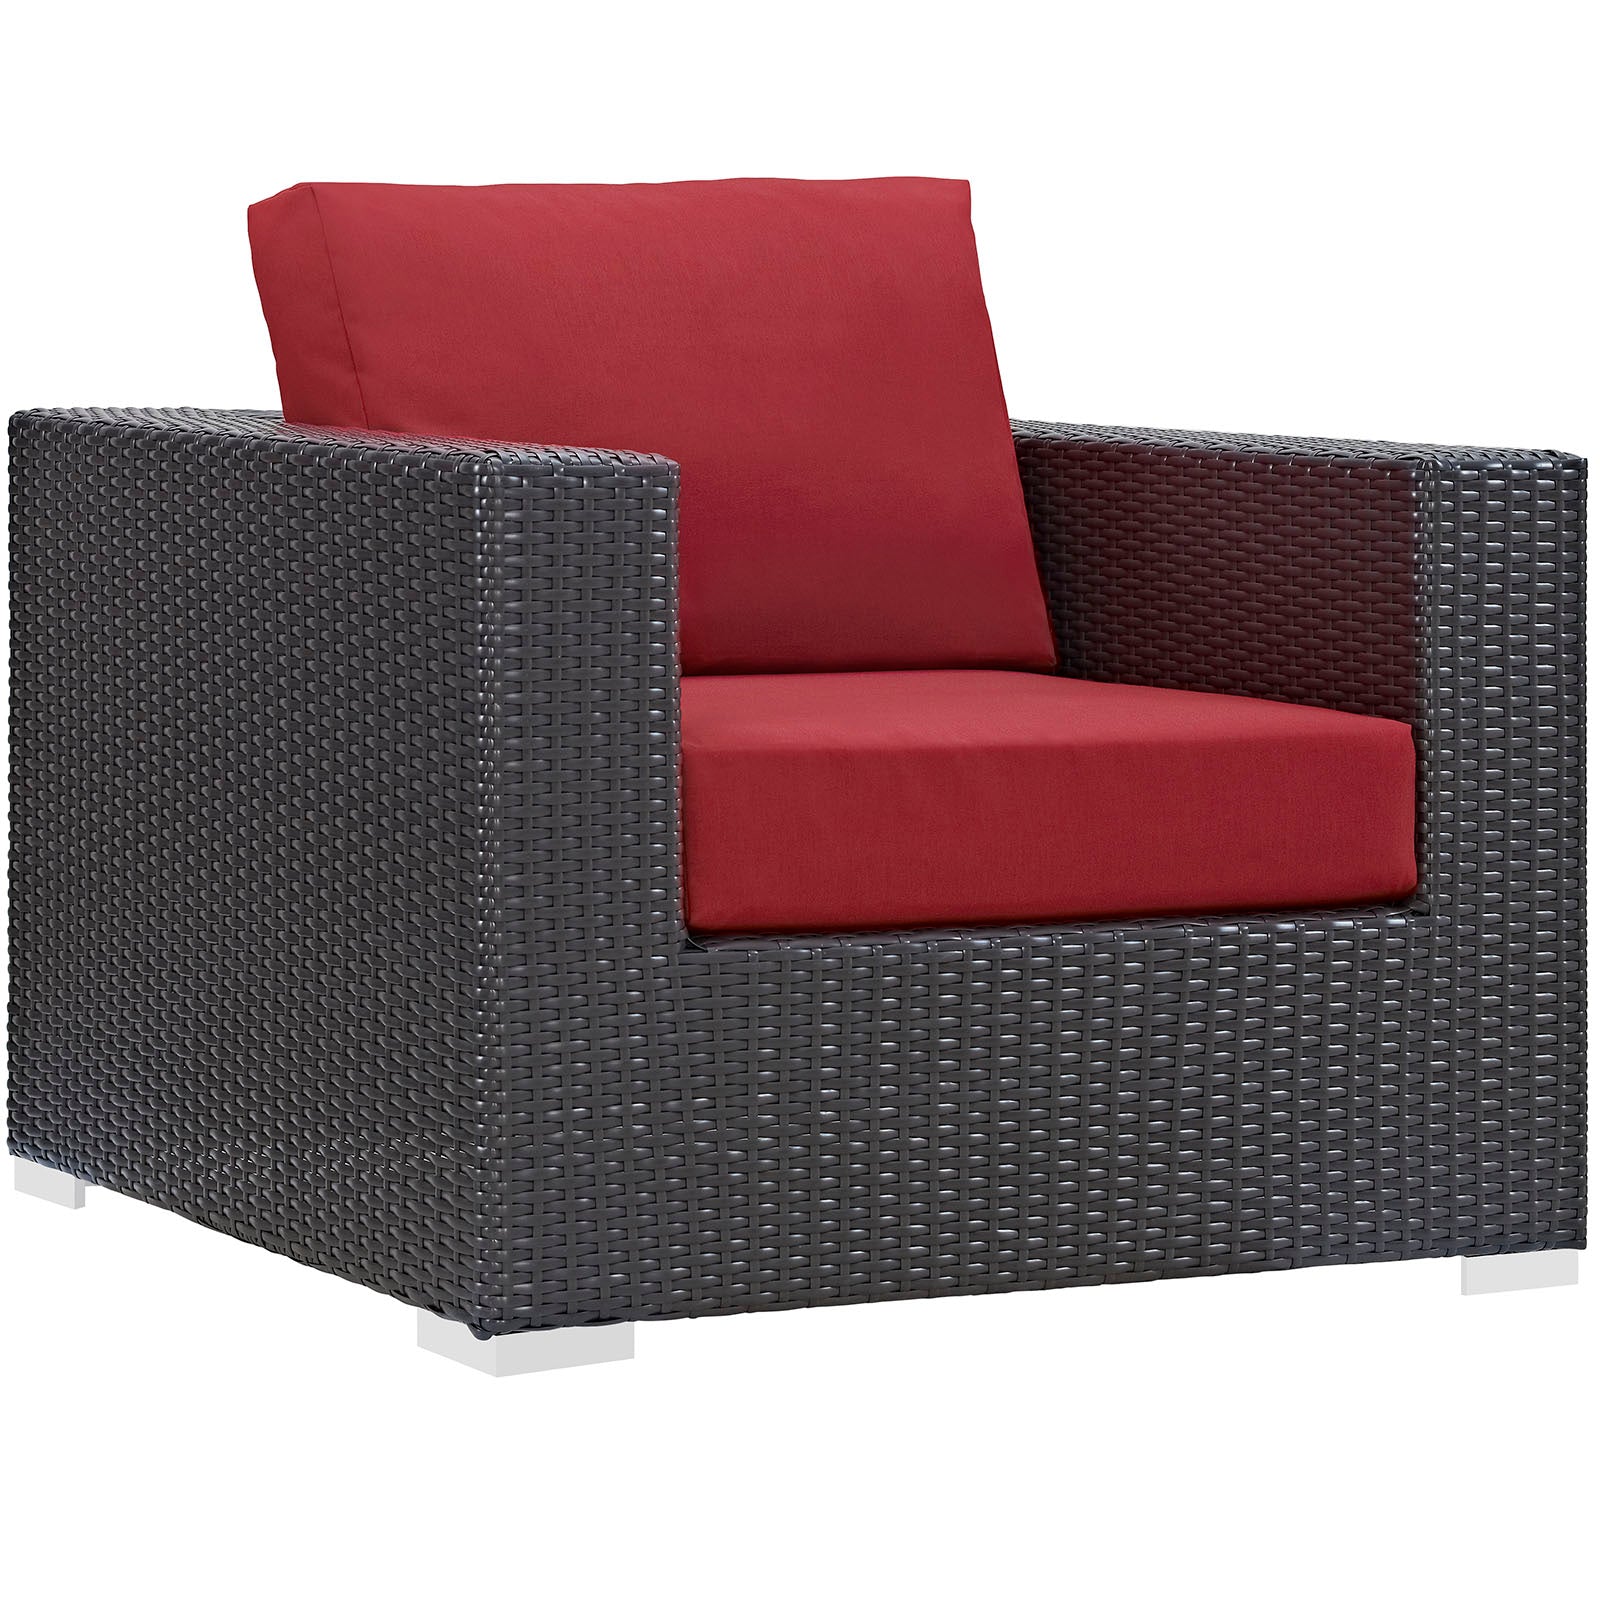 Modway Outdoor Conversation Sets - Convene 4 Piece Outdoor Patio Sectional Set in Espresso Red